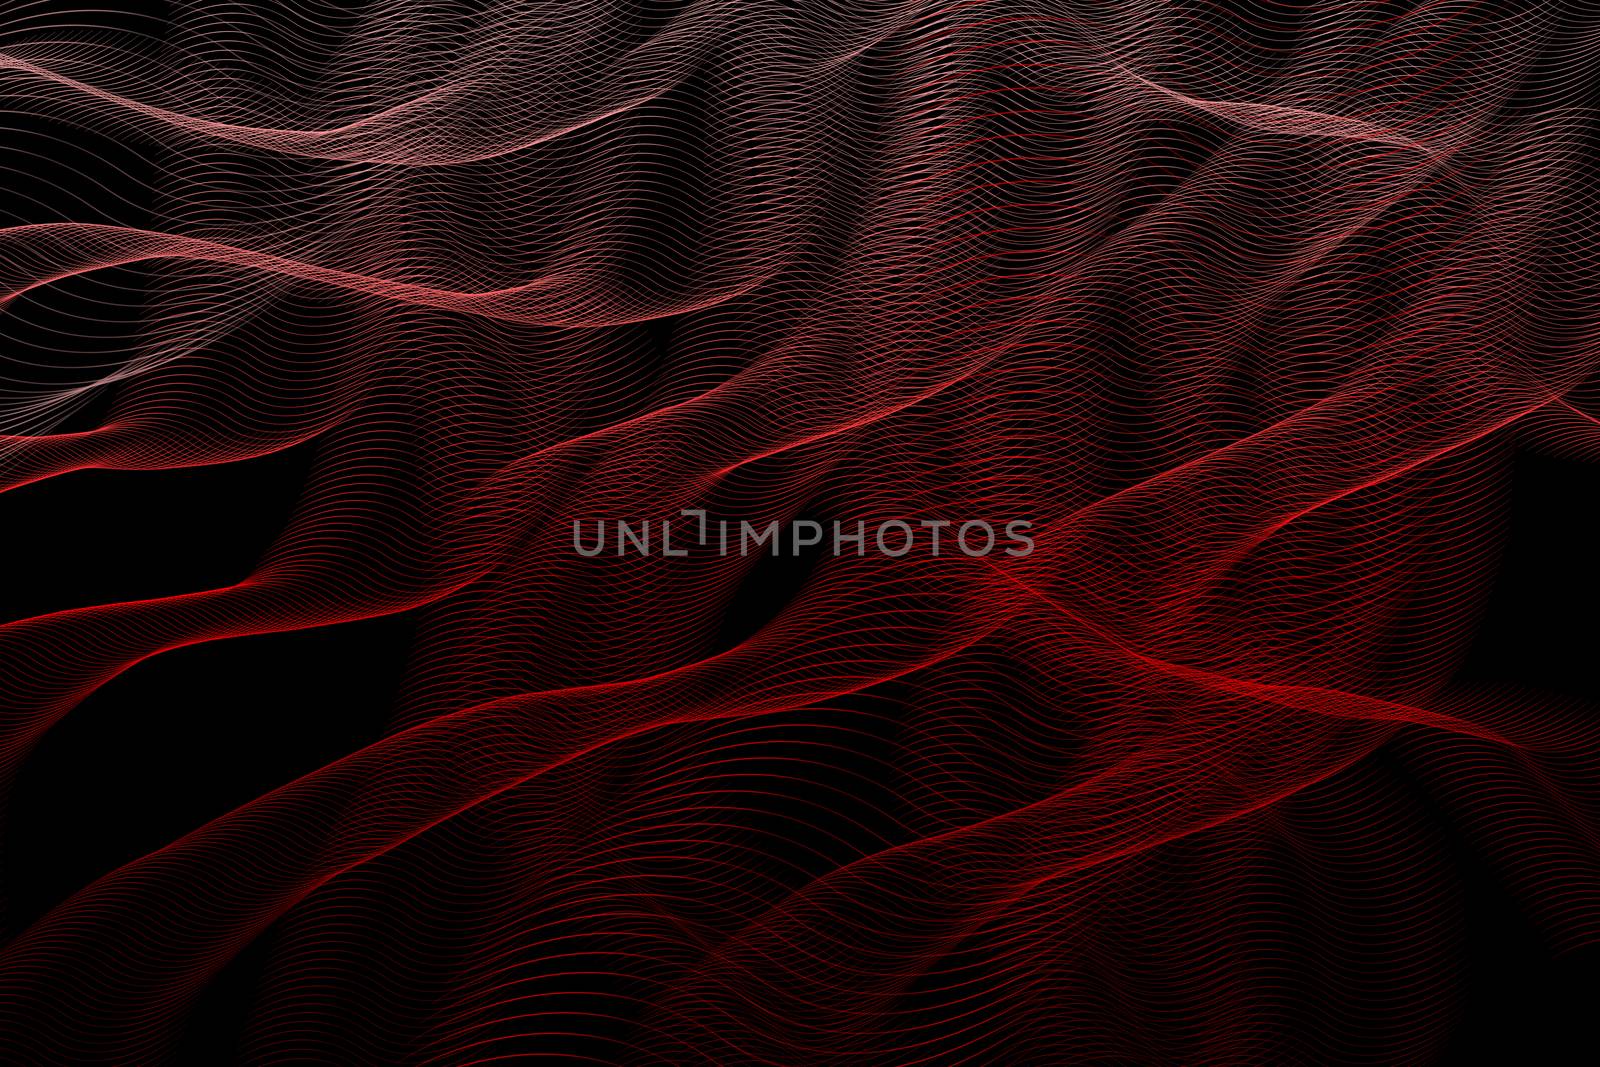 Bright fiery lines on black background for design